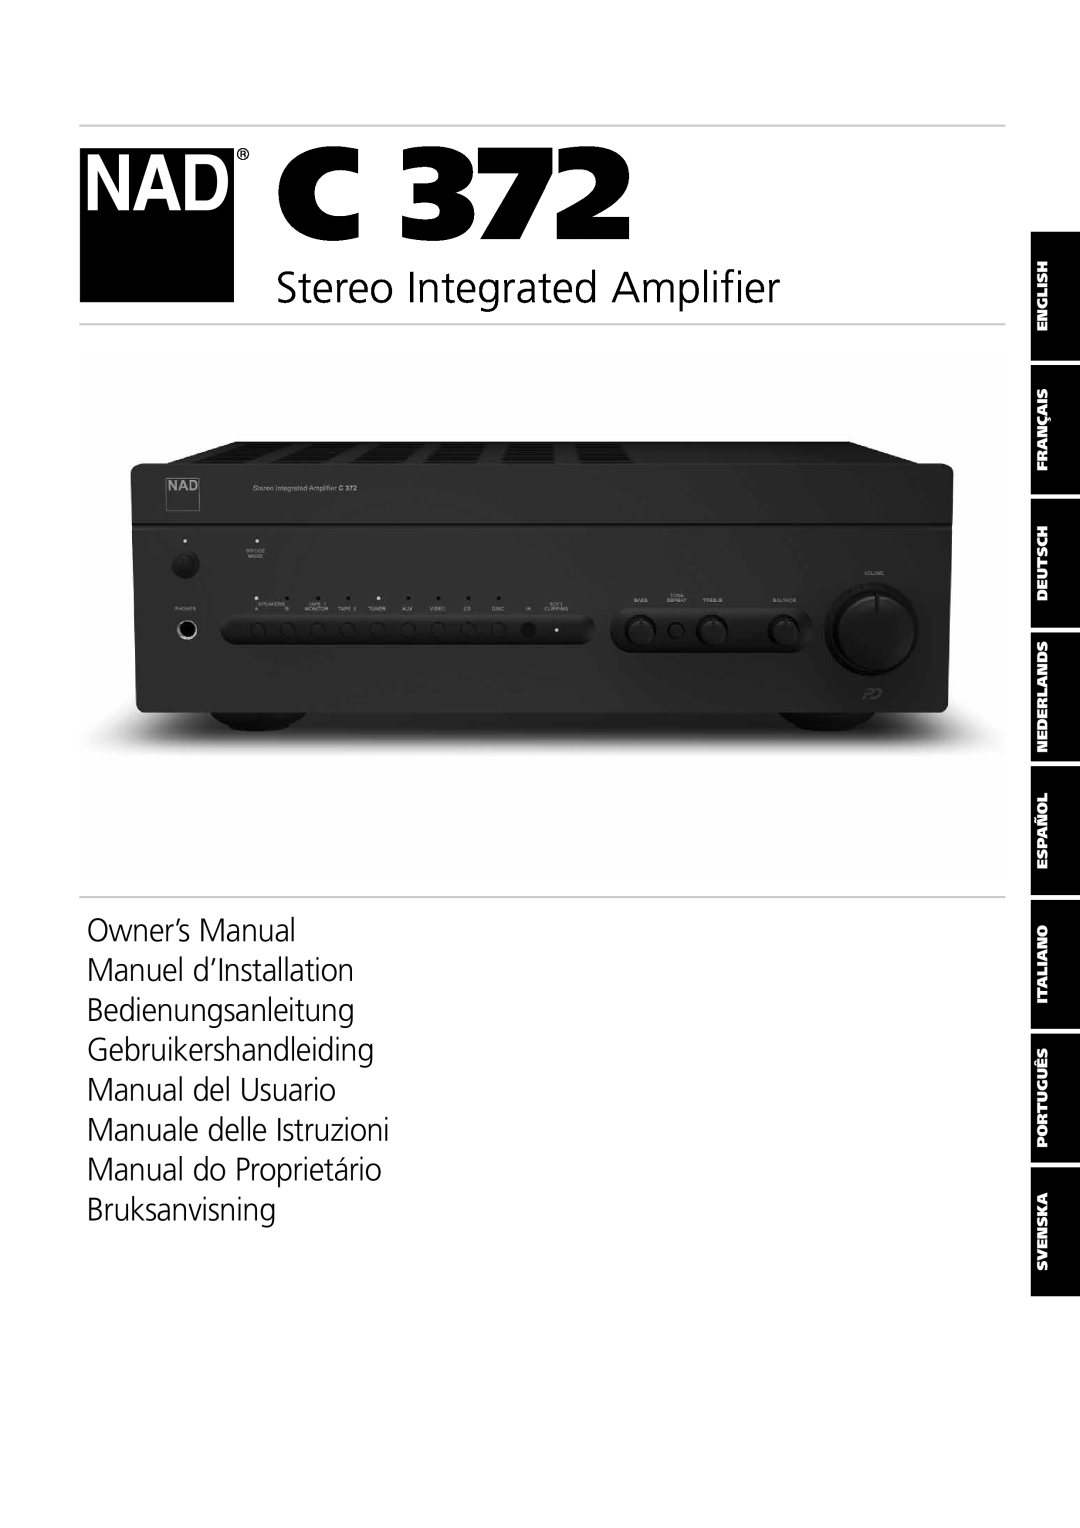 NAD C 372 owner manual Stereo Integrated Amplifier, Owner’s Manual Manuel d’Installation 